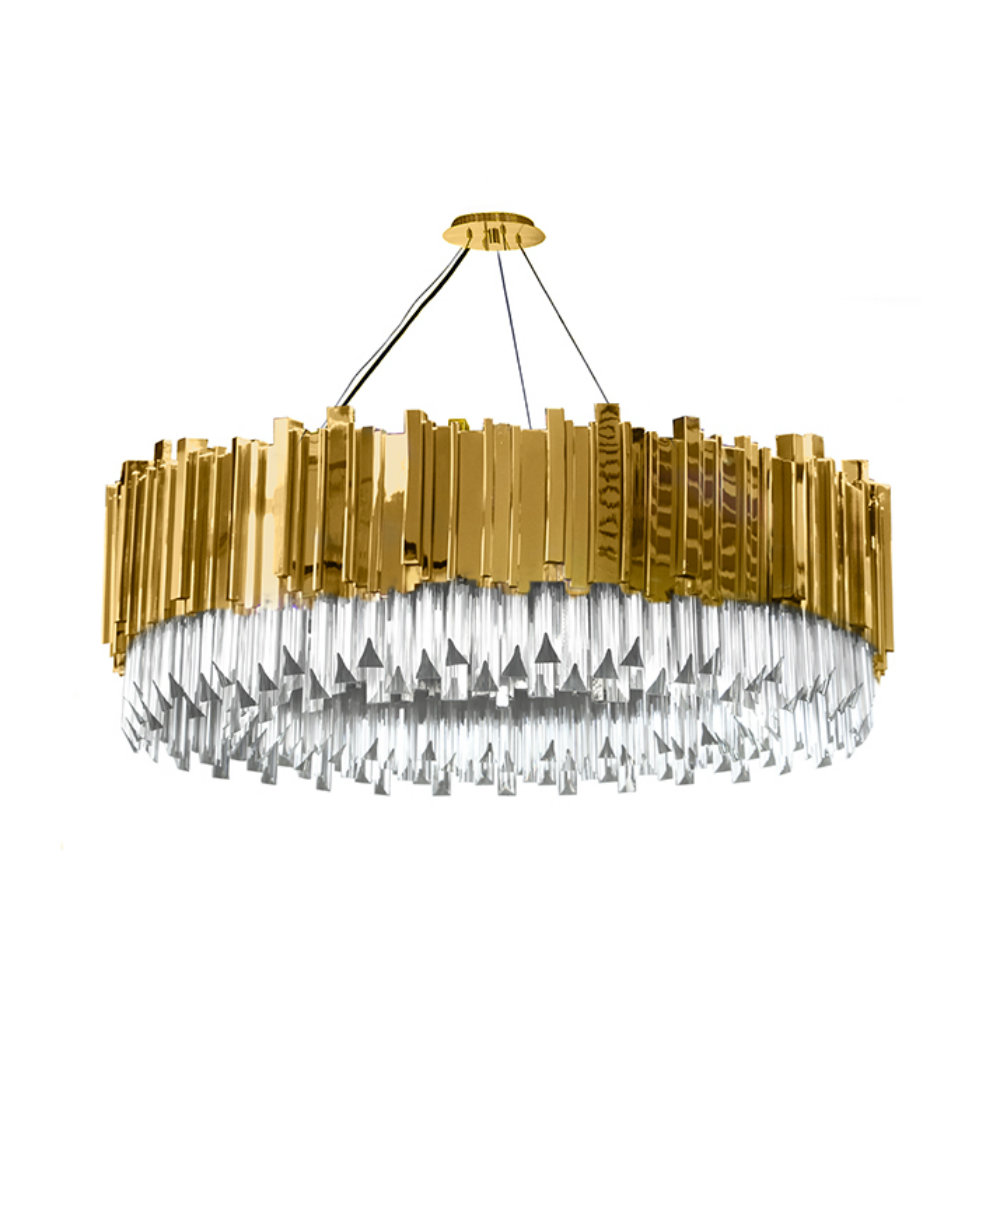 Lighting Inspiration: Meet the Empire Collection